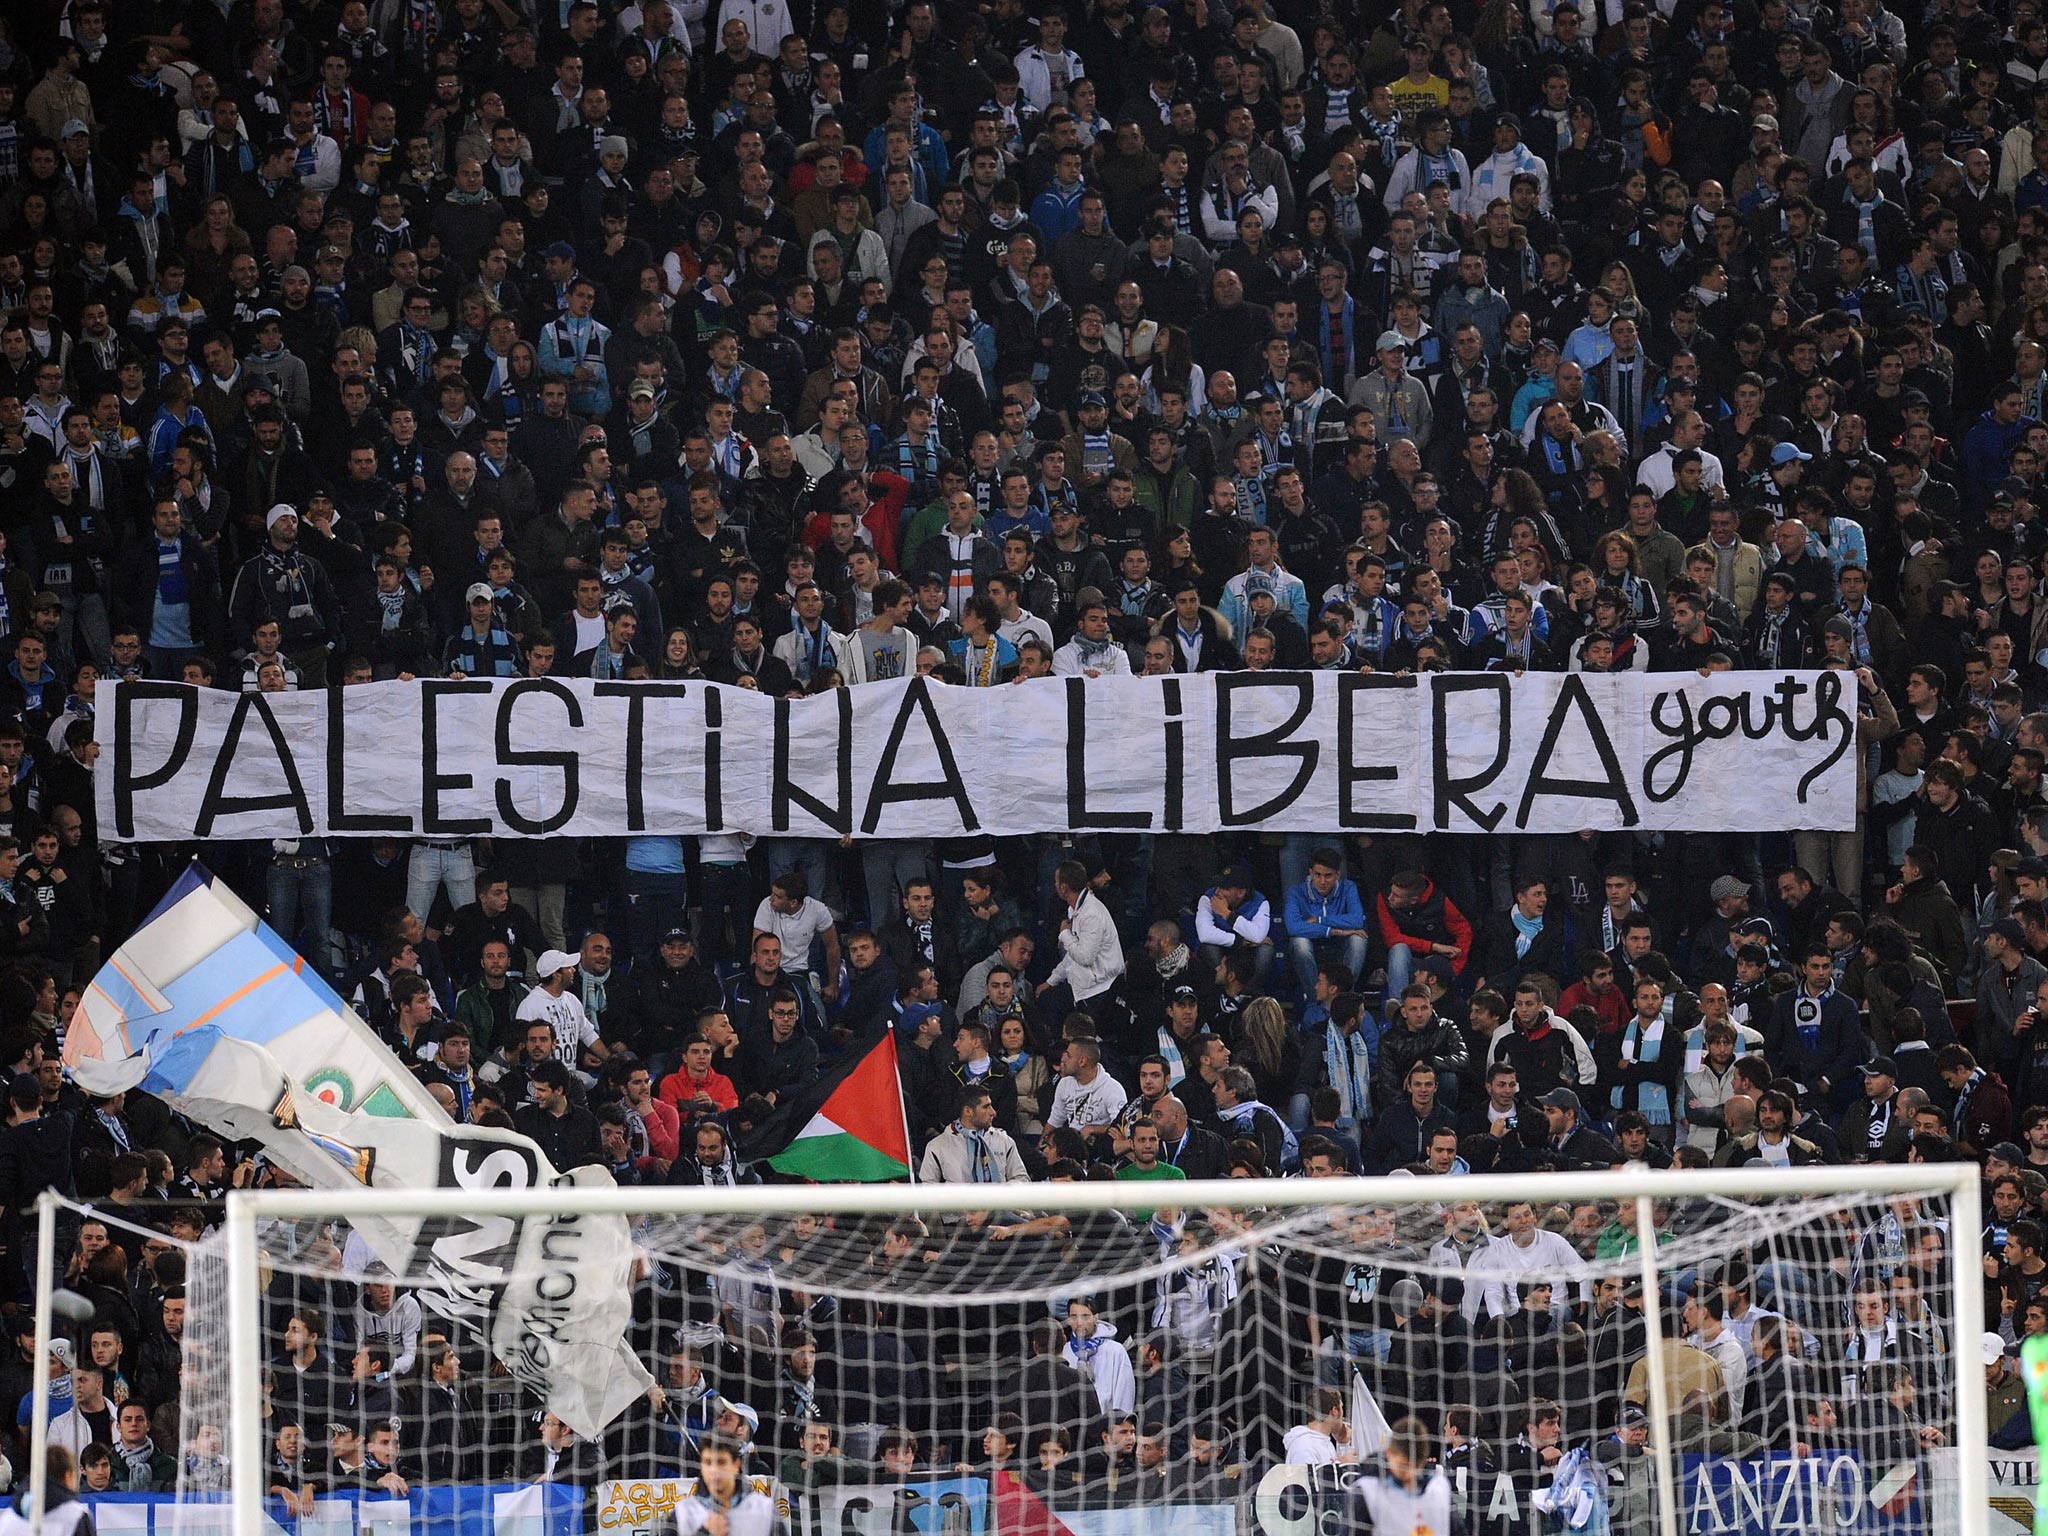 A view of the Lazio crowd during the match with Tottenham